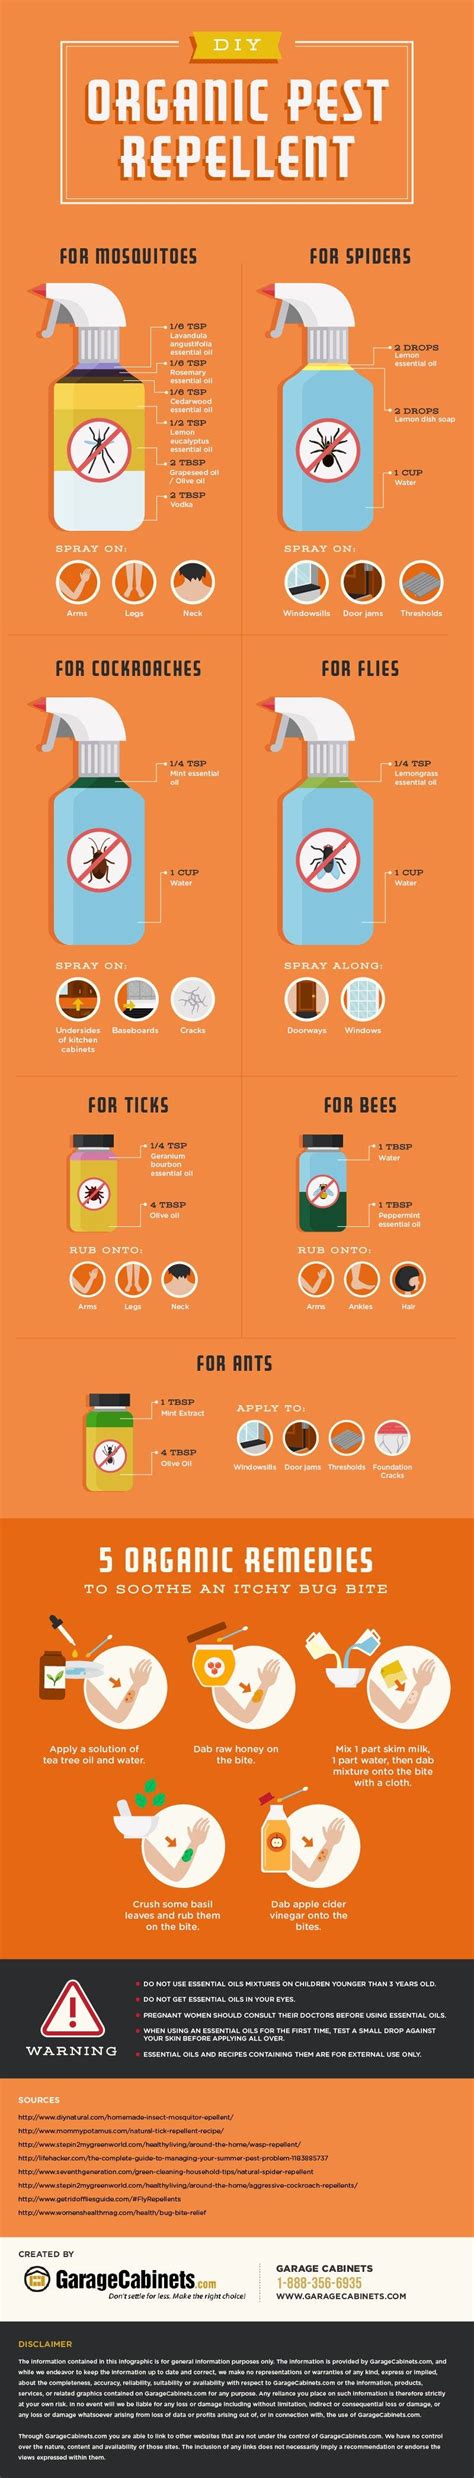 DIY Organic Repellant [Infographic] | ecogreenlove Diy Cleaners, Cleaners Homemade, Household ...